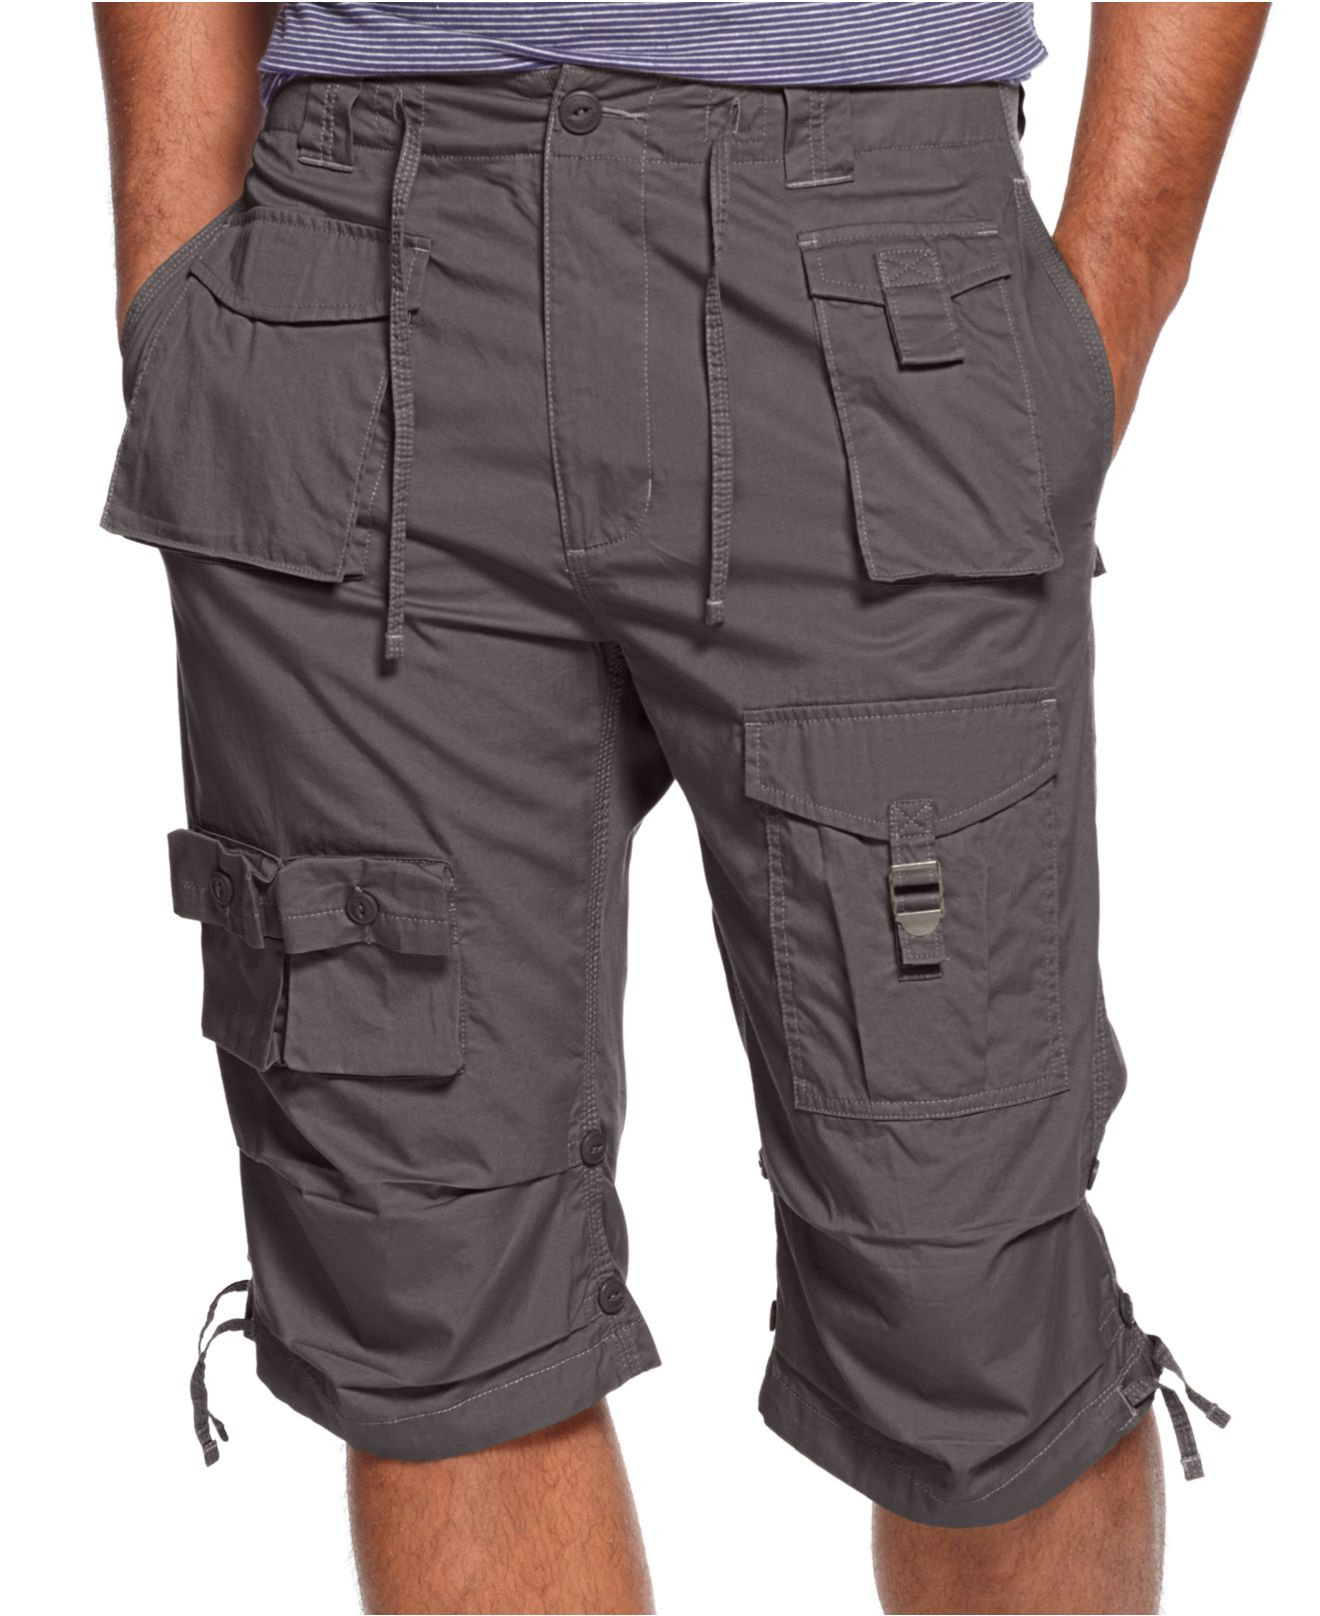 extendable at hip points Warrior Cargo Shorts Traditional waistband HL241